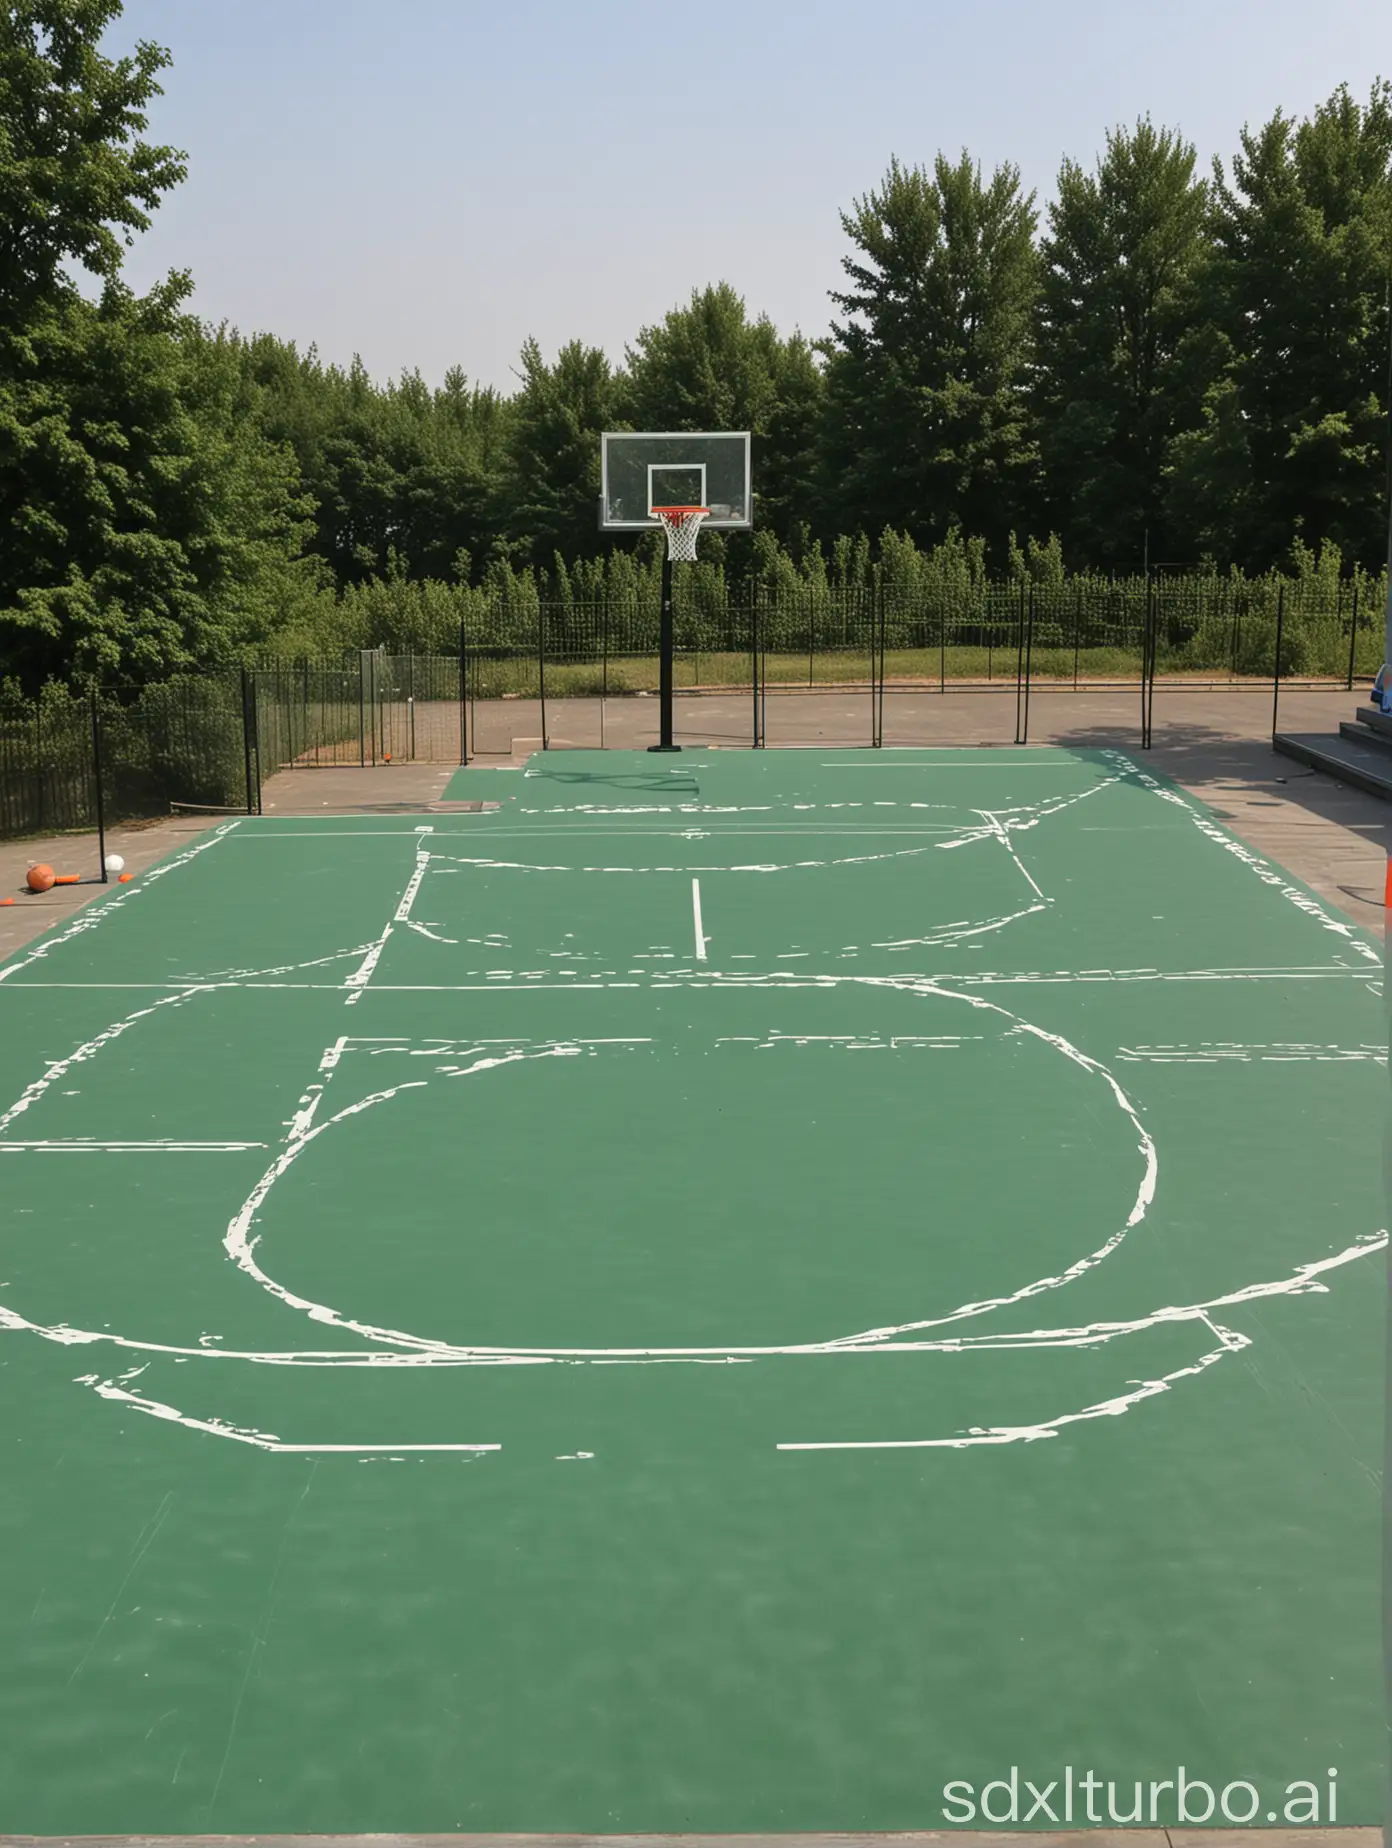 Vibrant-Outdoor-Basketball-Court-on-Suspended-Plastic-Flooring